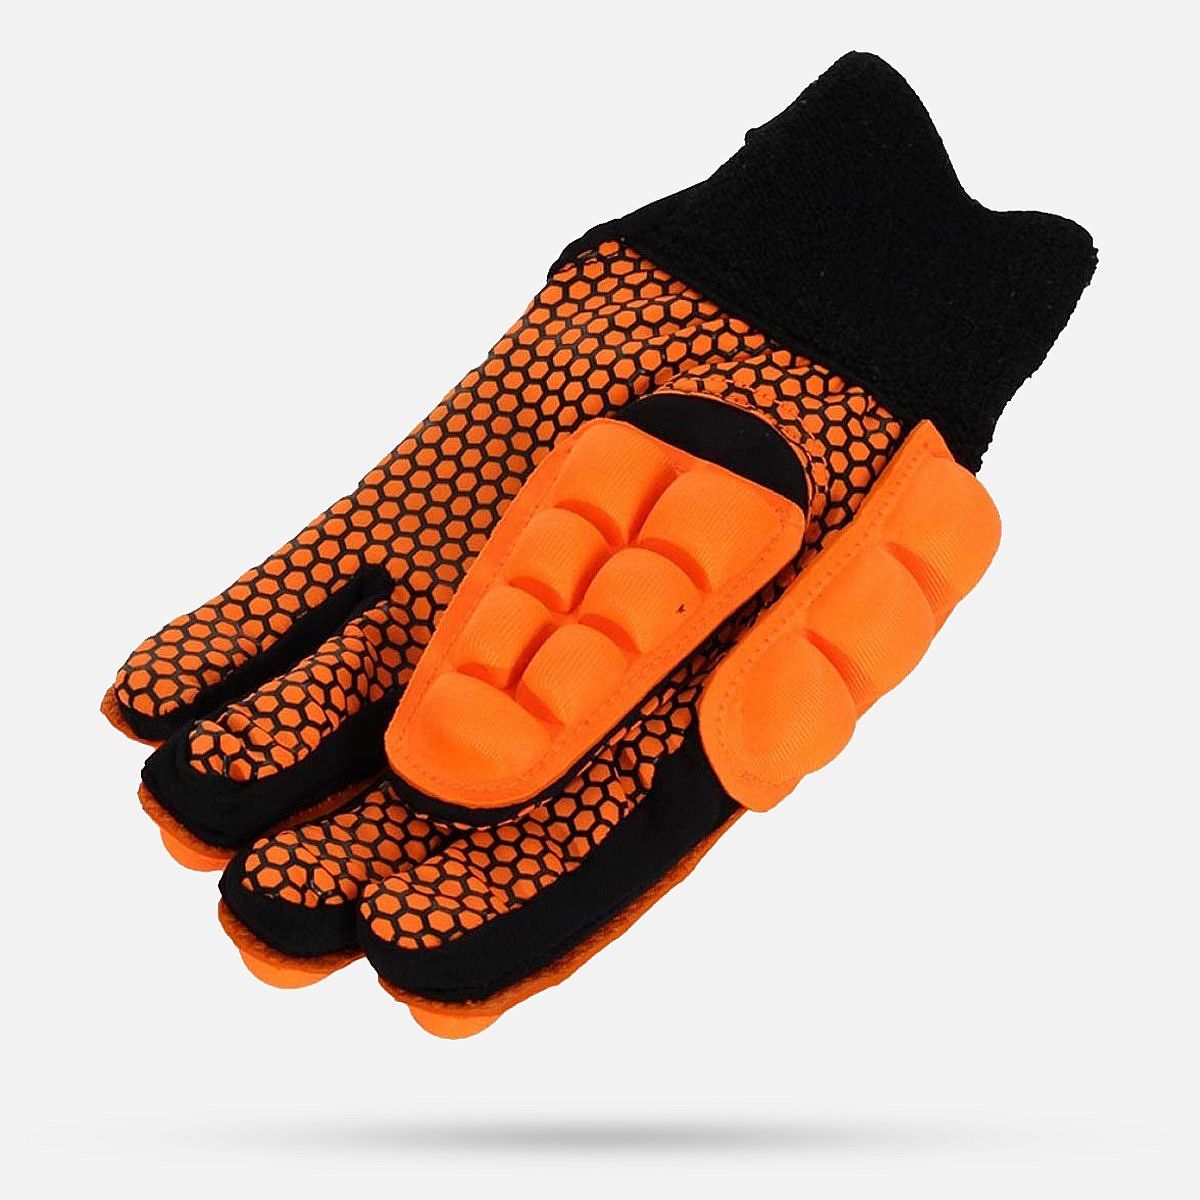 AN237256 bp1082 indoor glove f2.1 l.h. or